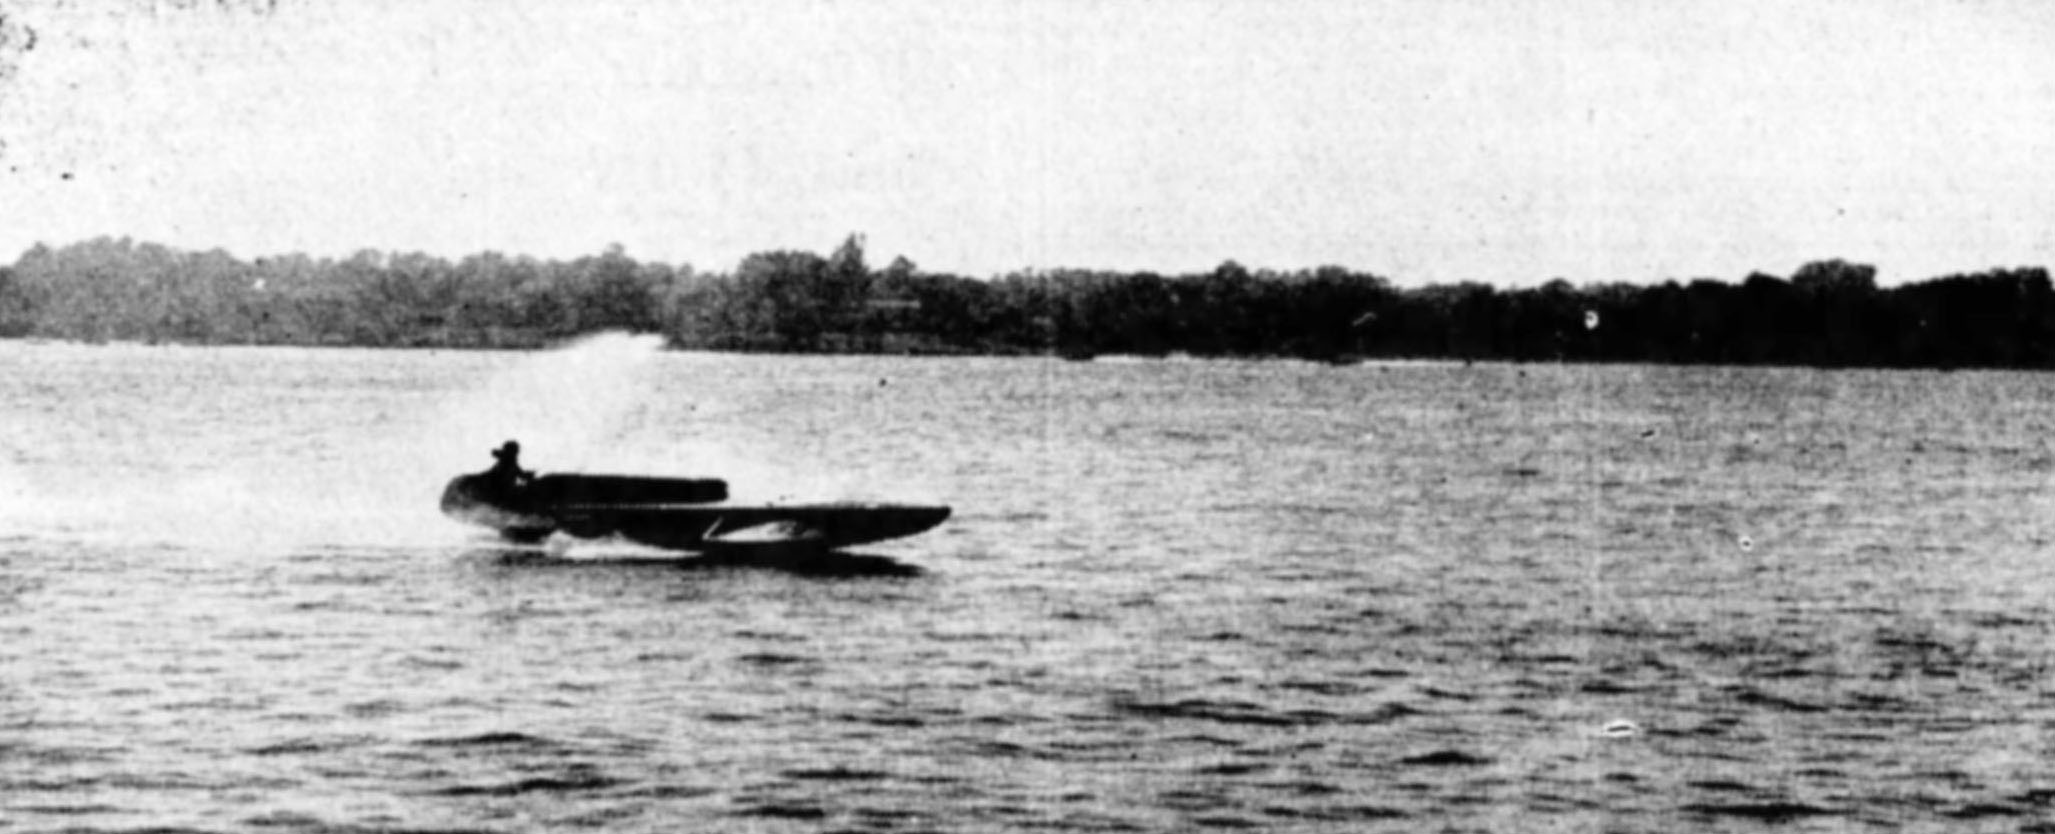 1947 National Sweepstakes - Foster Takes Lead in Regatta Feature Events